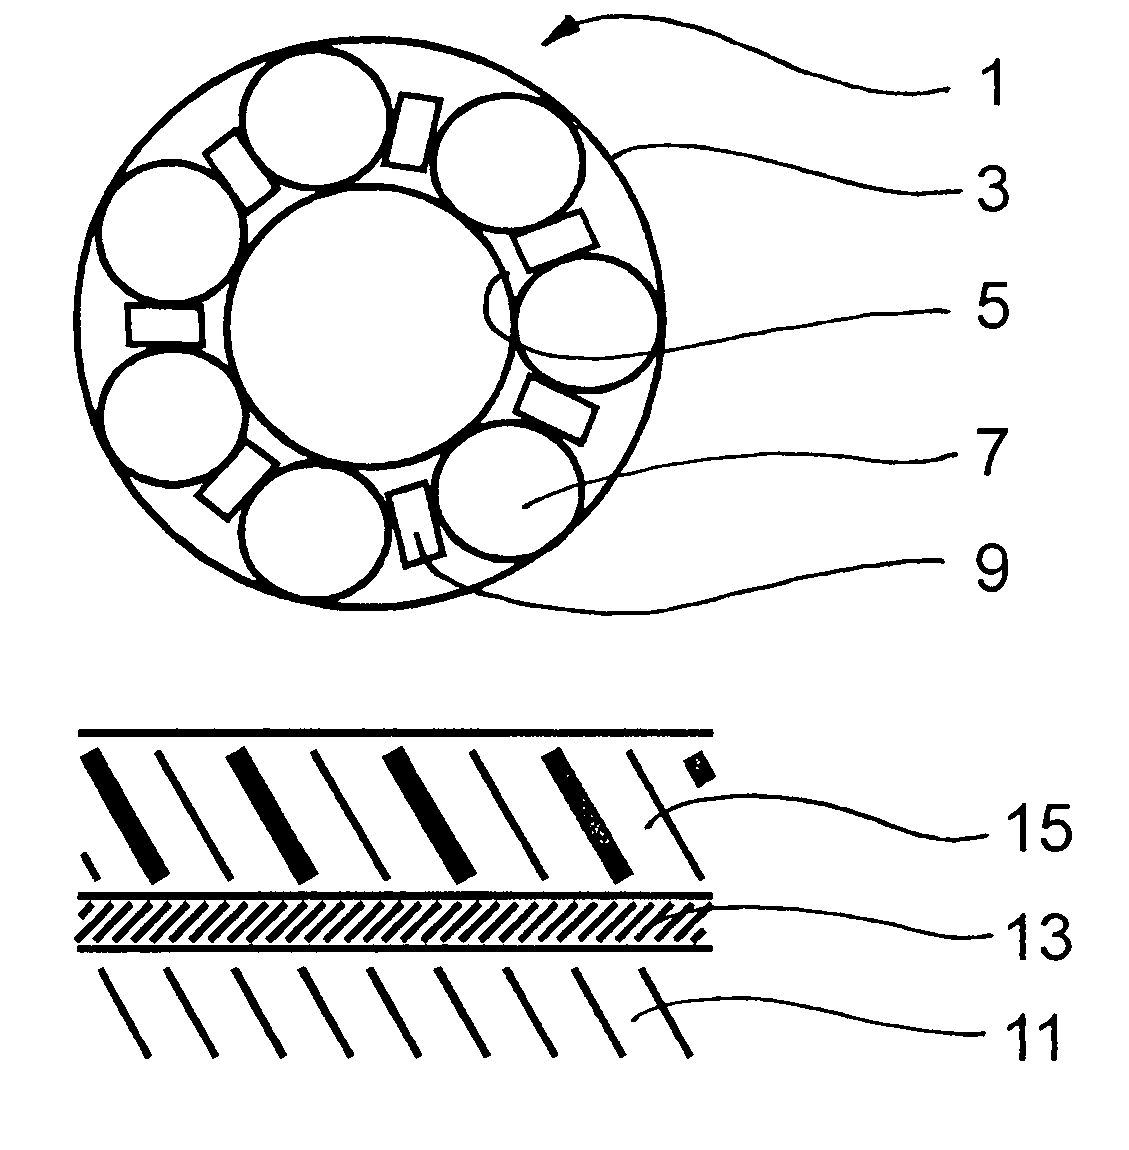 Bearing or drive assembly with coated elements